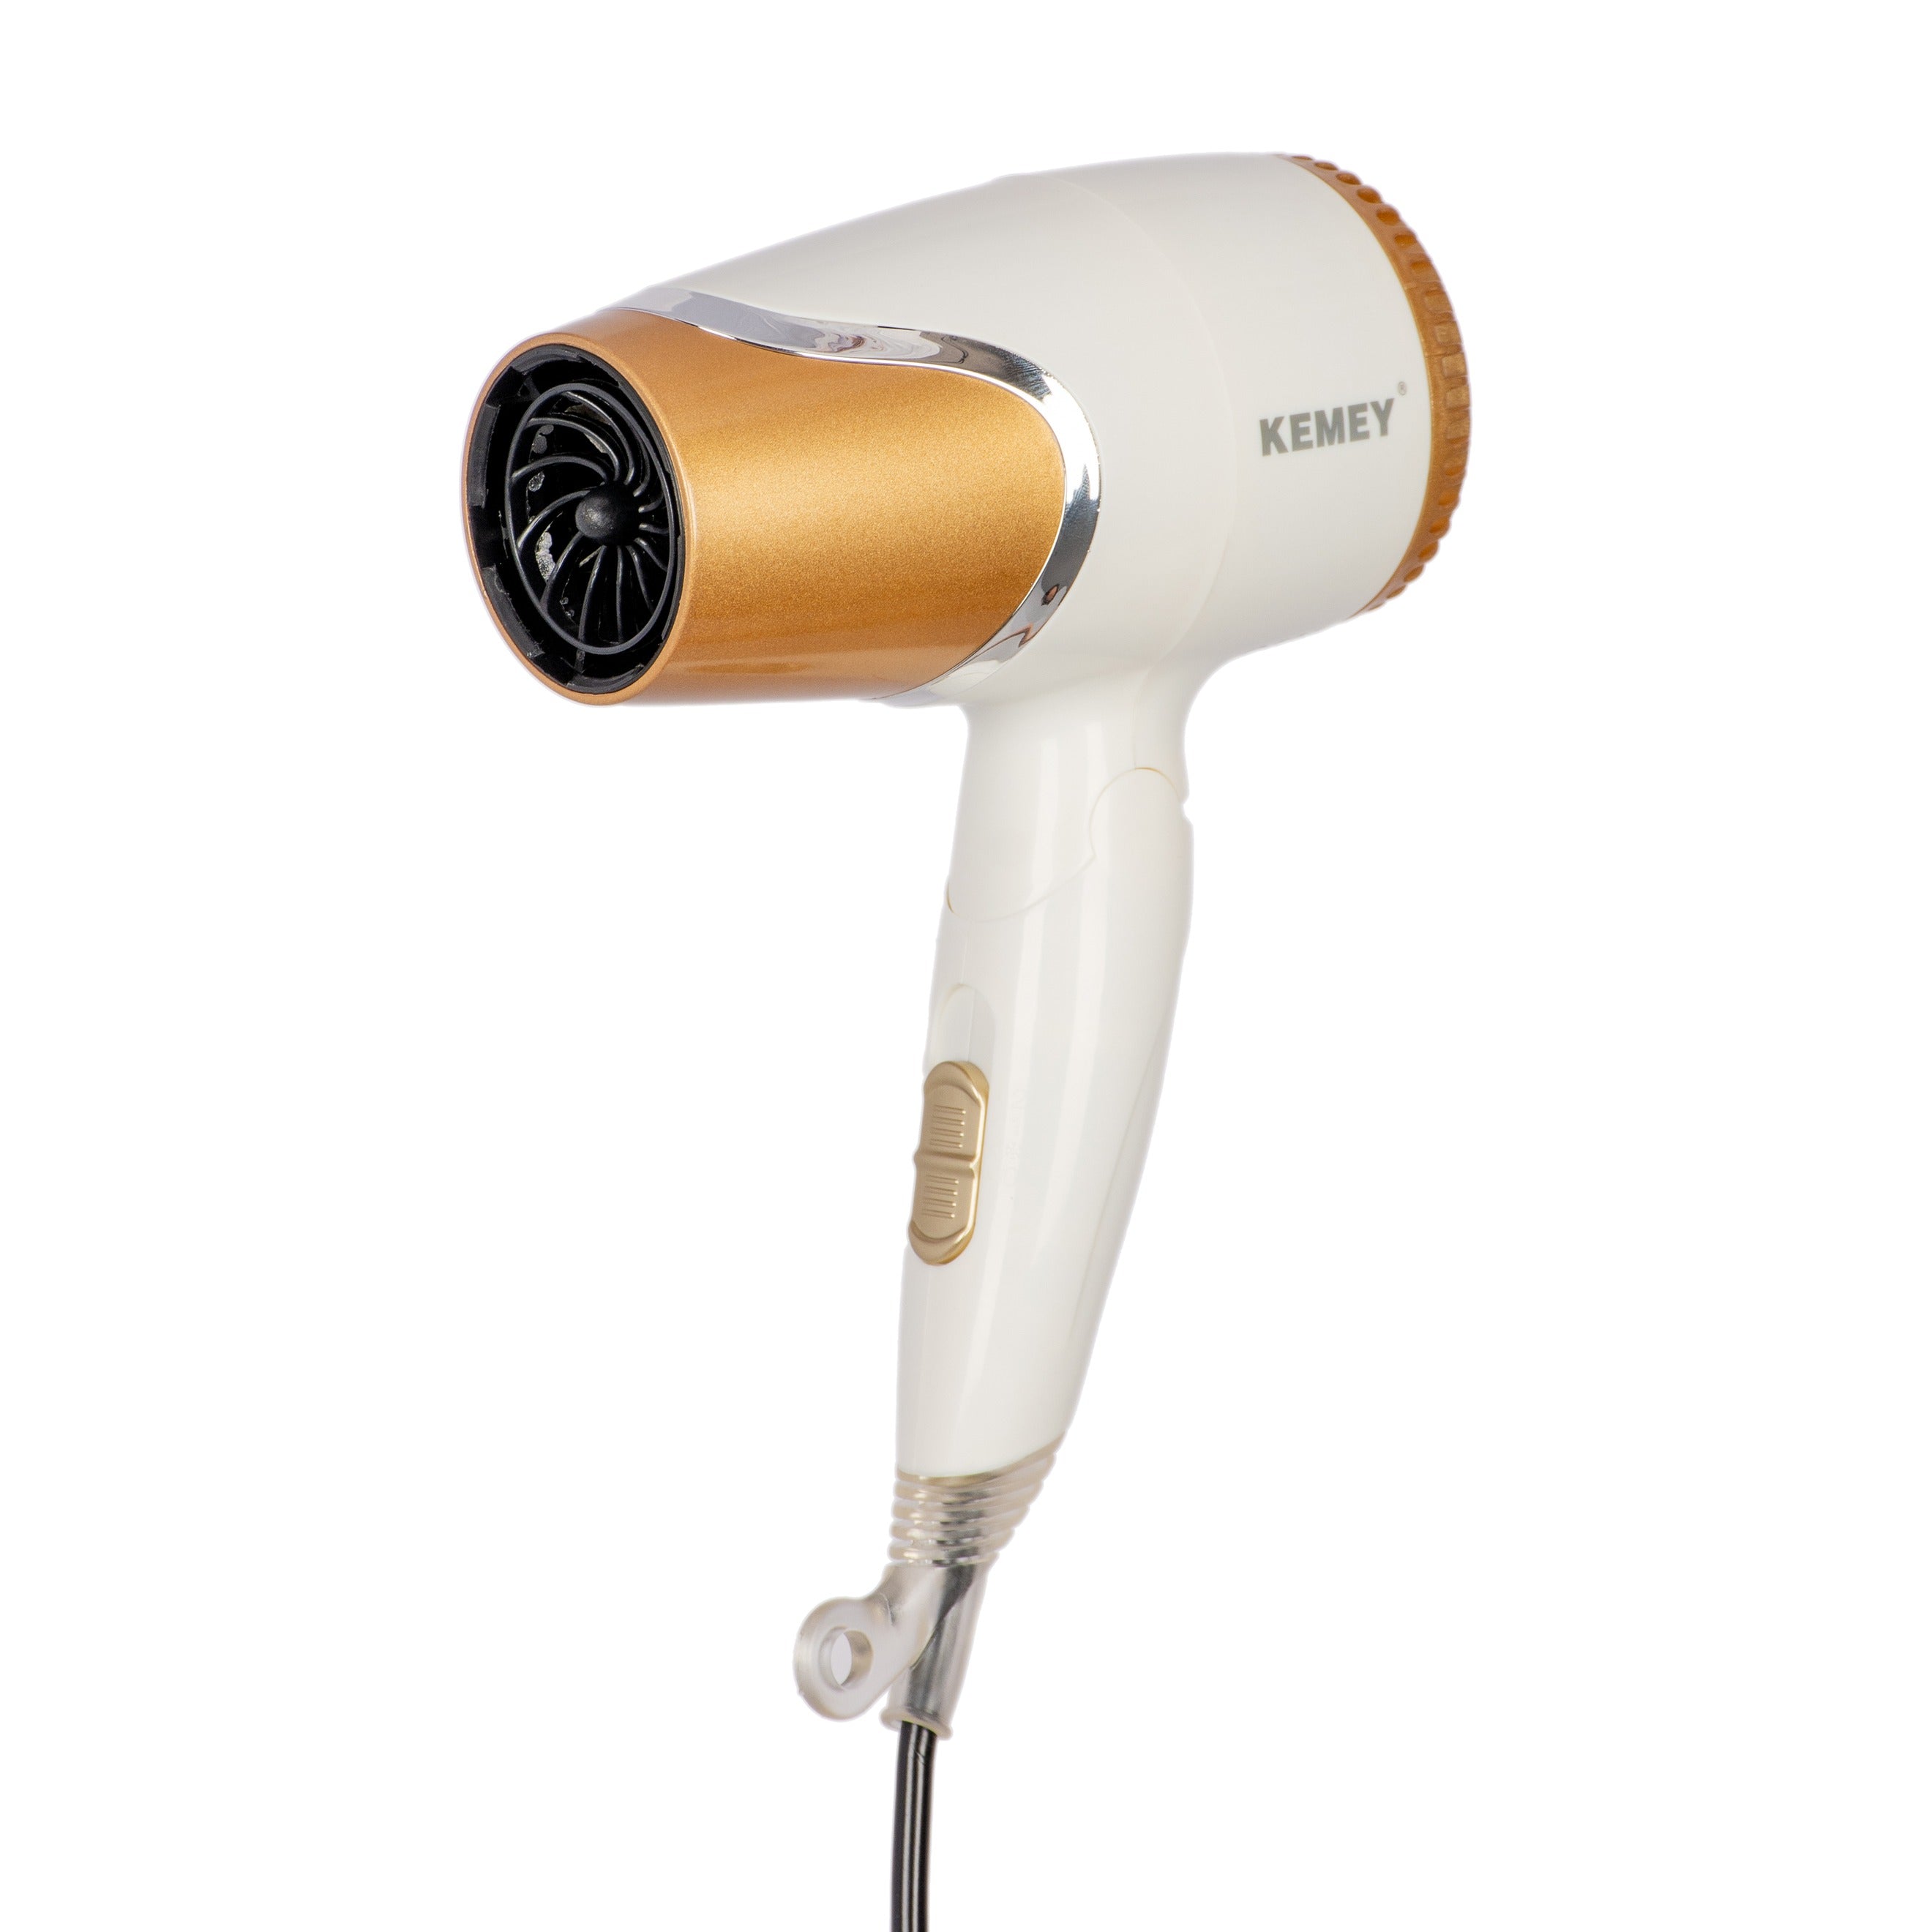 KEMEY KM-6832 Electric Foldable Travel Hair Dryer with 2 Speed Control